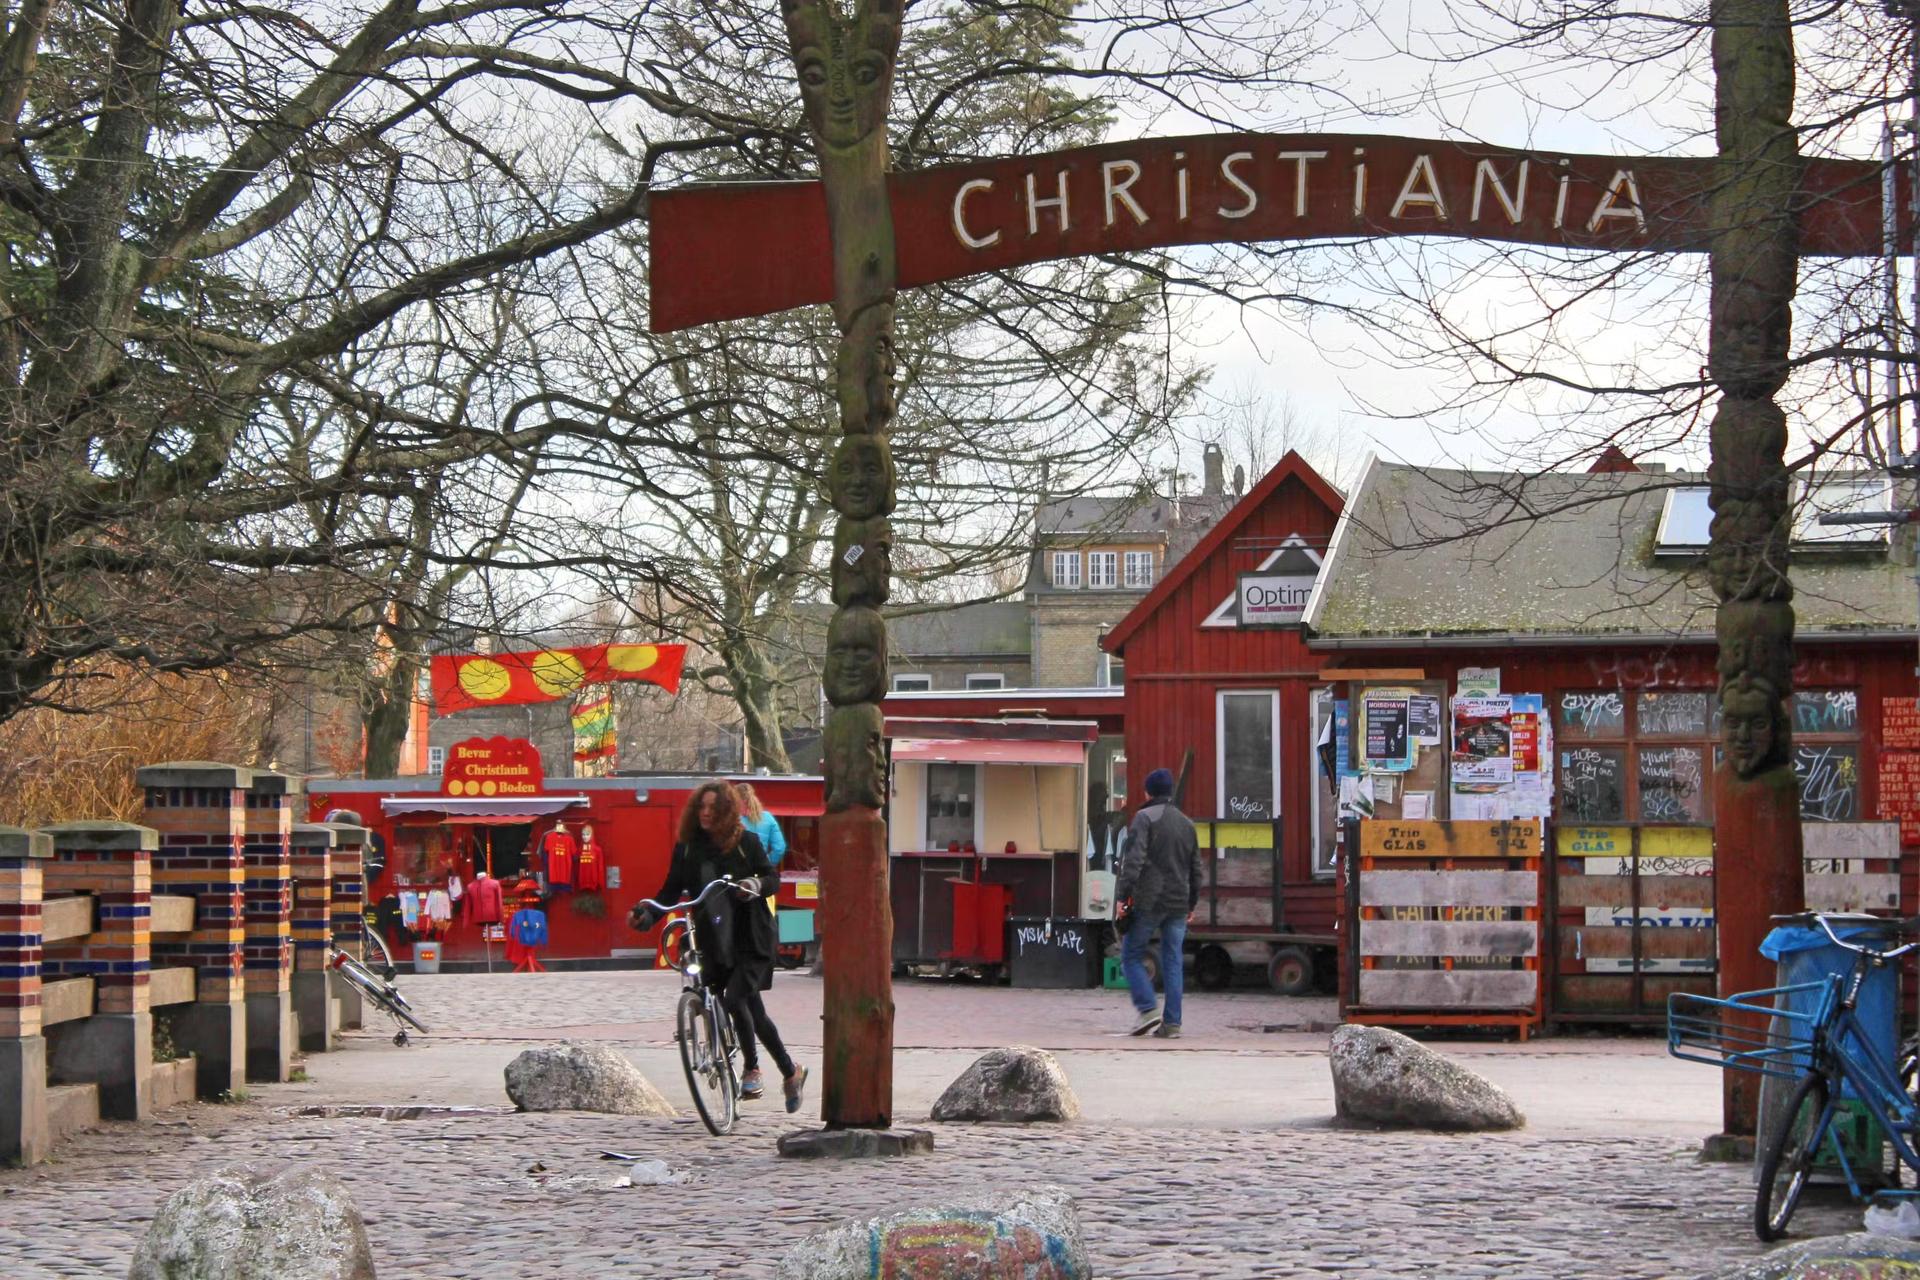 Copenhagen neighbourhoods - A woman cycles by the large wooden Christiania sign. In the background we can see wooden huts and stalls, more bicycles and one other person wearing a hat and warm coat. 